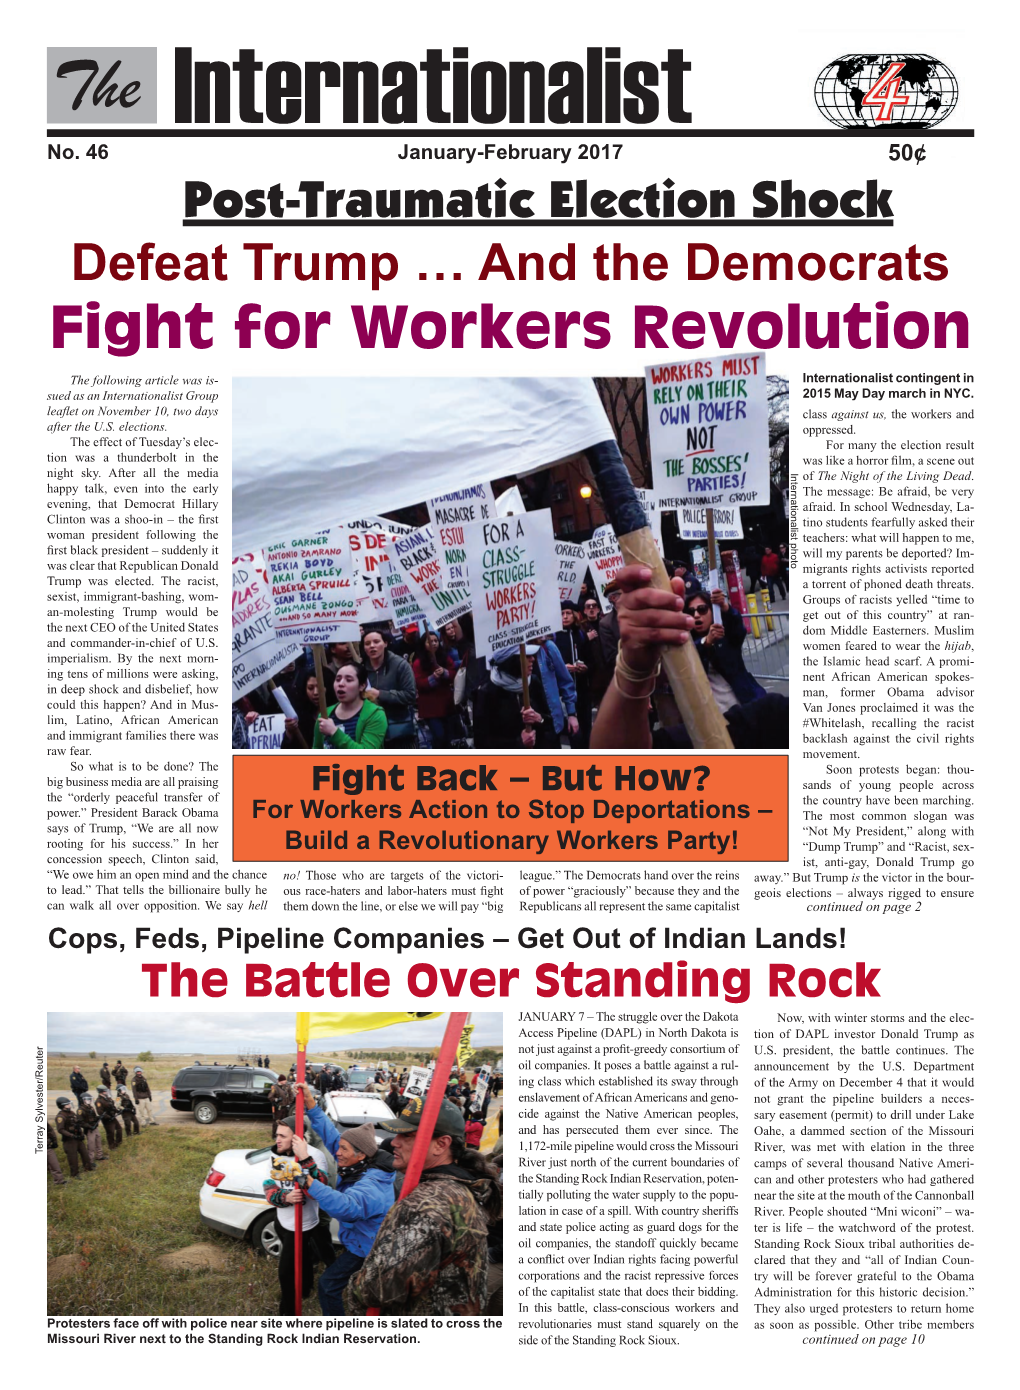 Fight for Workers Revolution